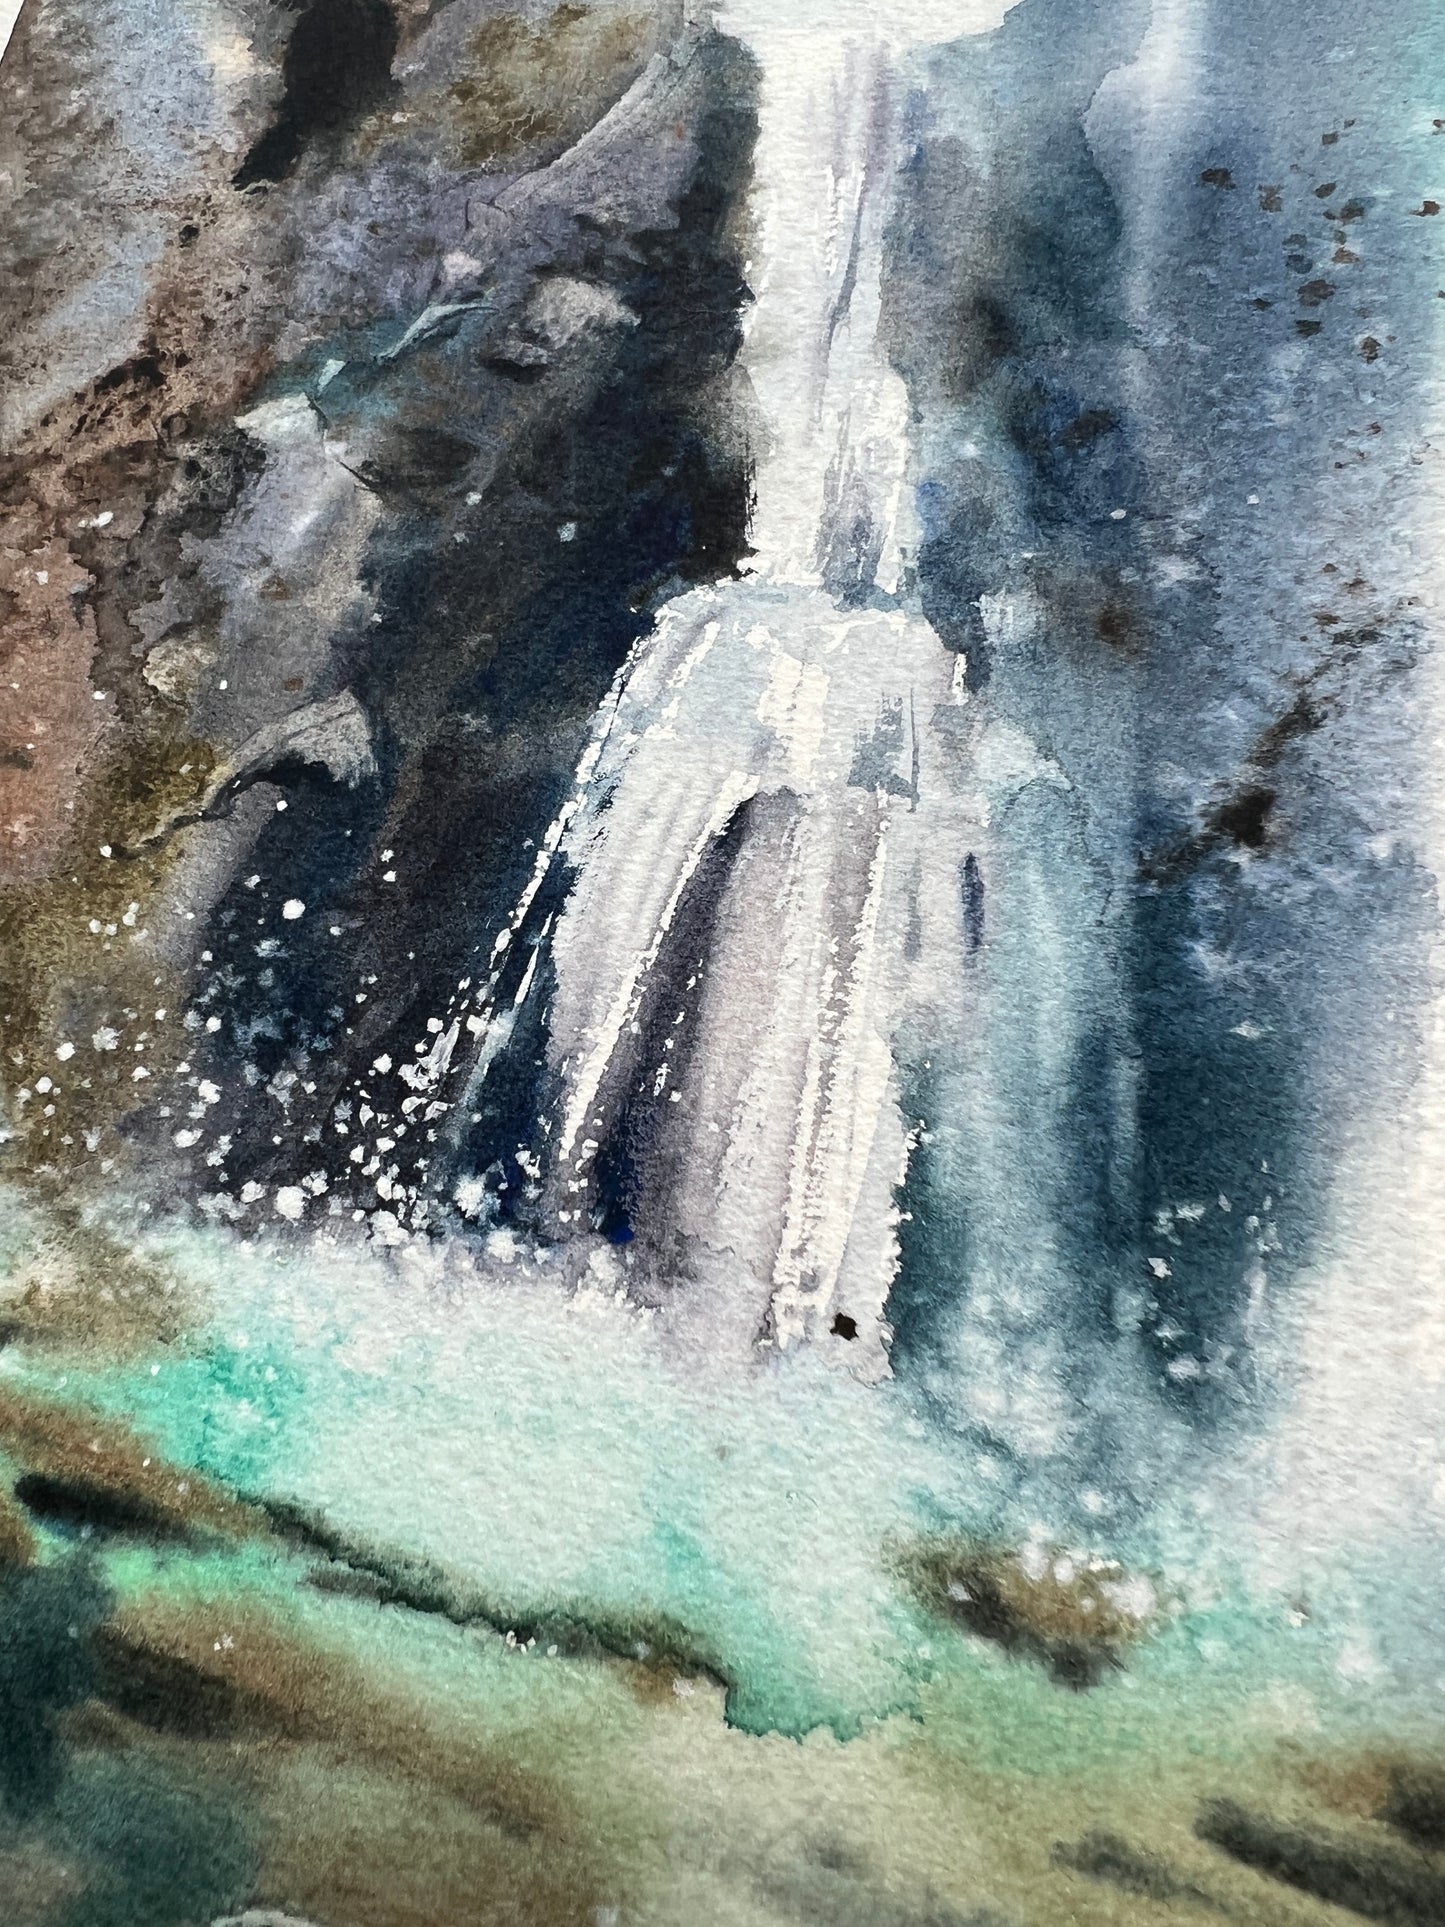 Original Waterfall Watercolor Painting On Paper, Abstract Nature Wall Art, Impressionistic Landscape Artwork, Home Decor